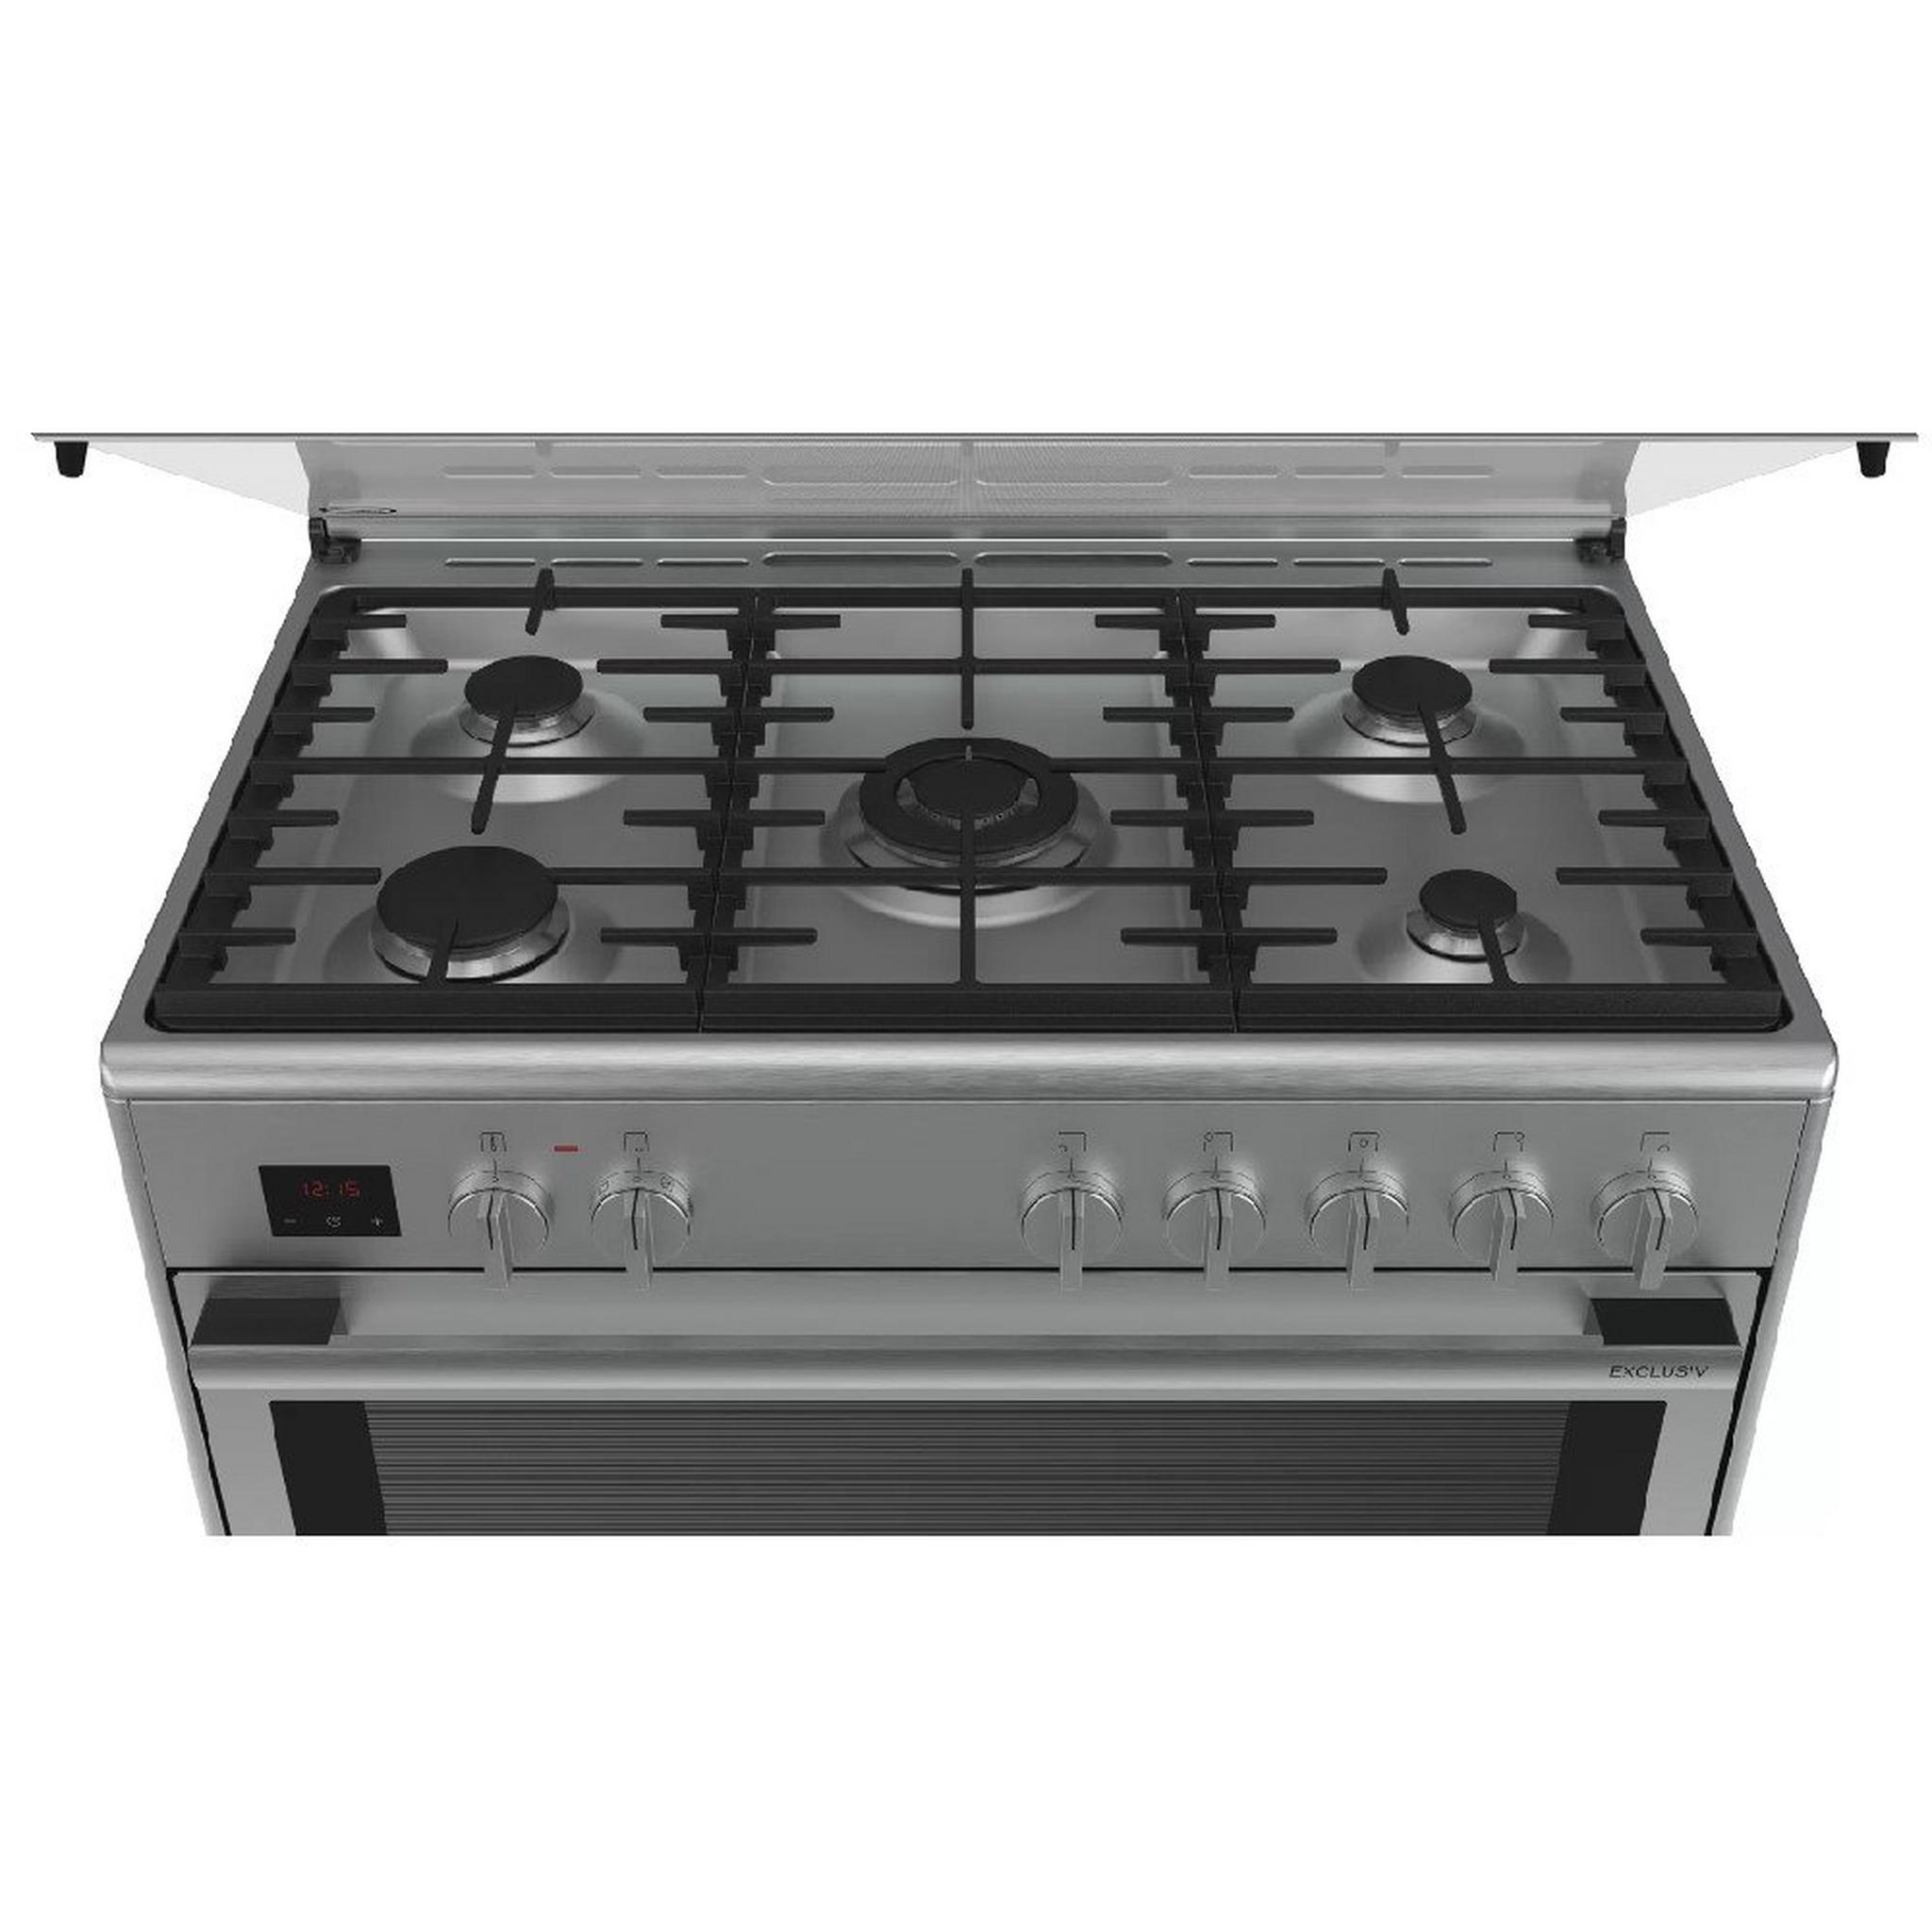 Bosch Series 8 5 Burners Dual fuel Cooker, 90X60cm, HSB738357M - Stainless Steel